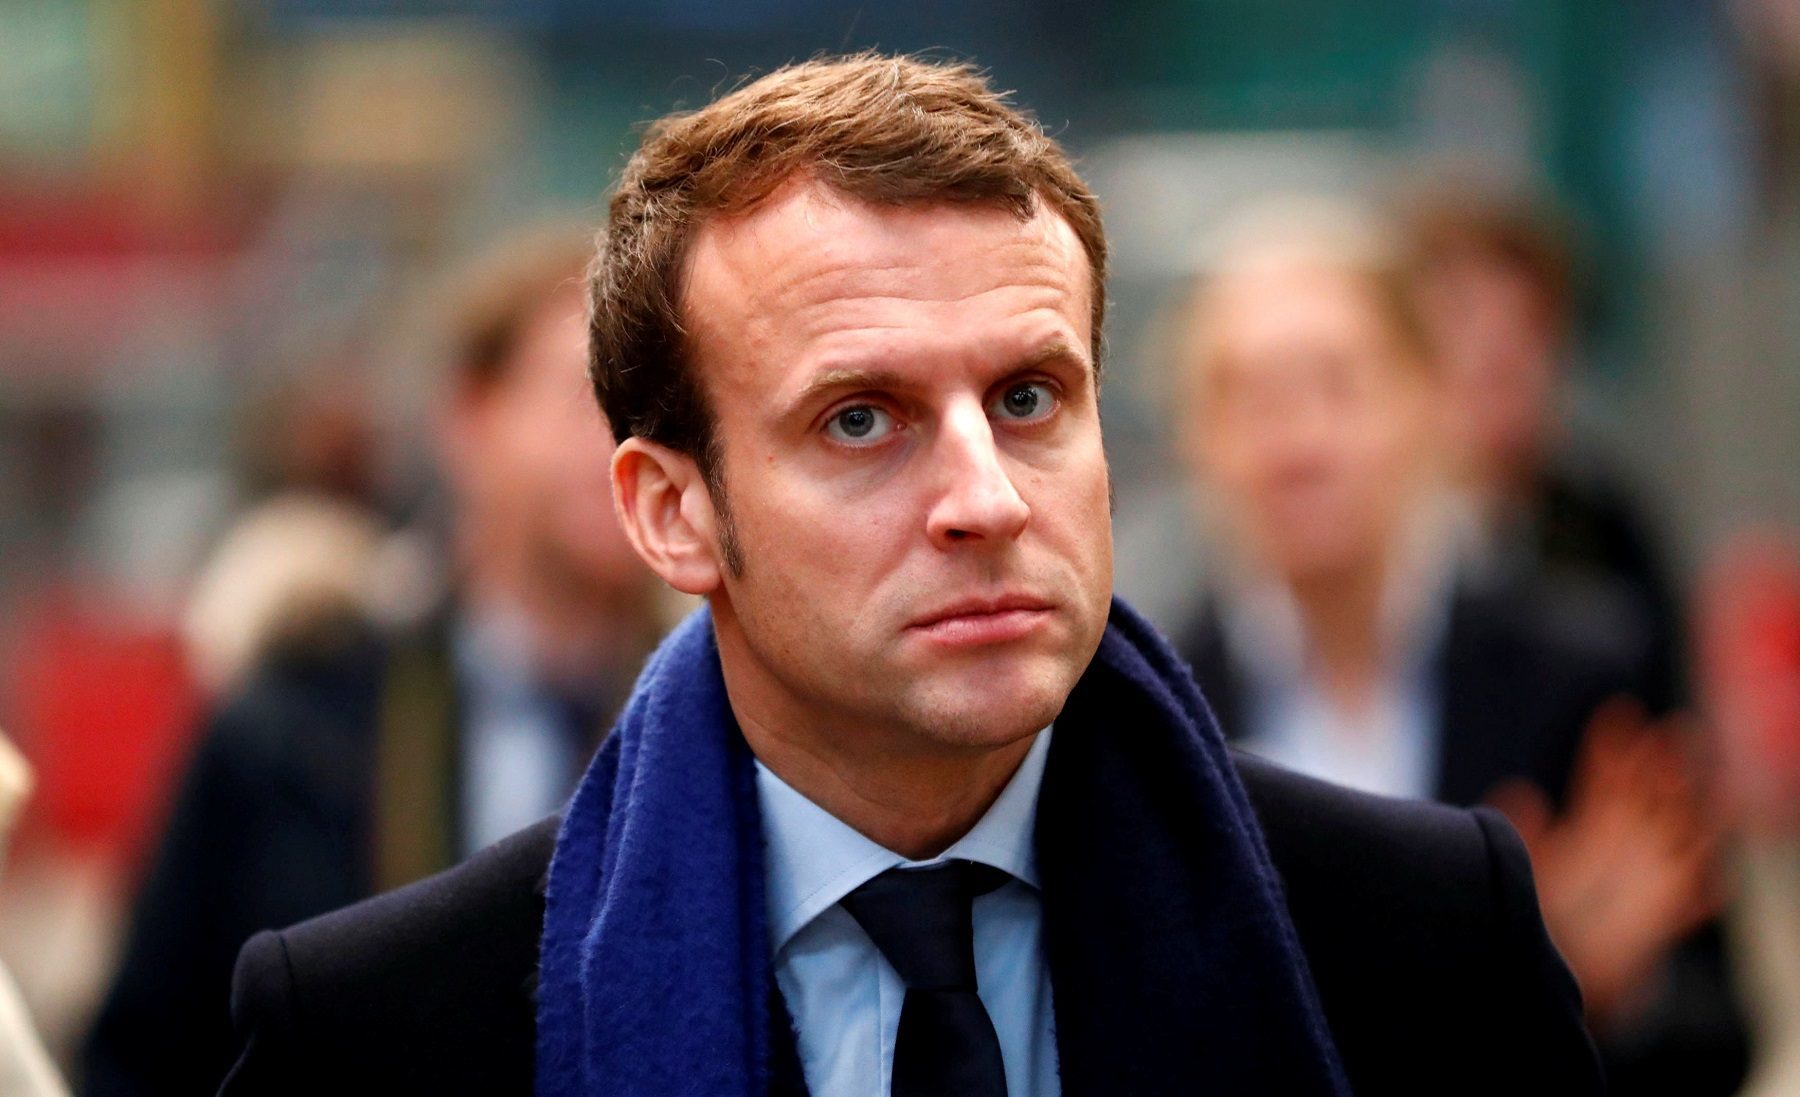 macron-s-government-launches-campaign-to-dismantle-workers-rights